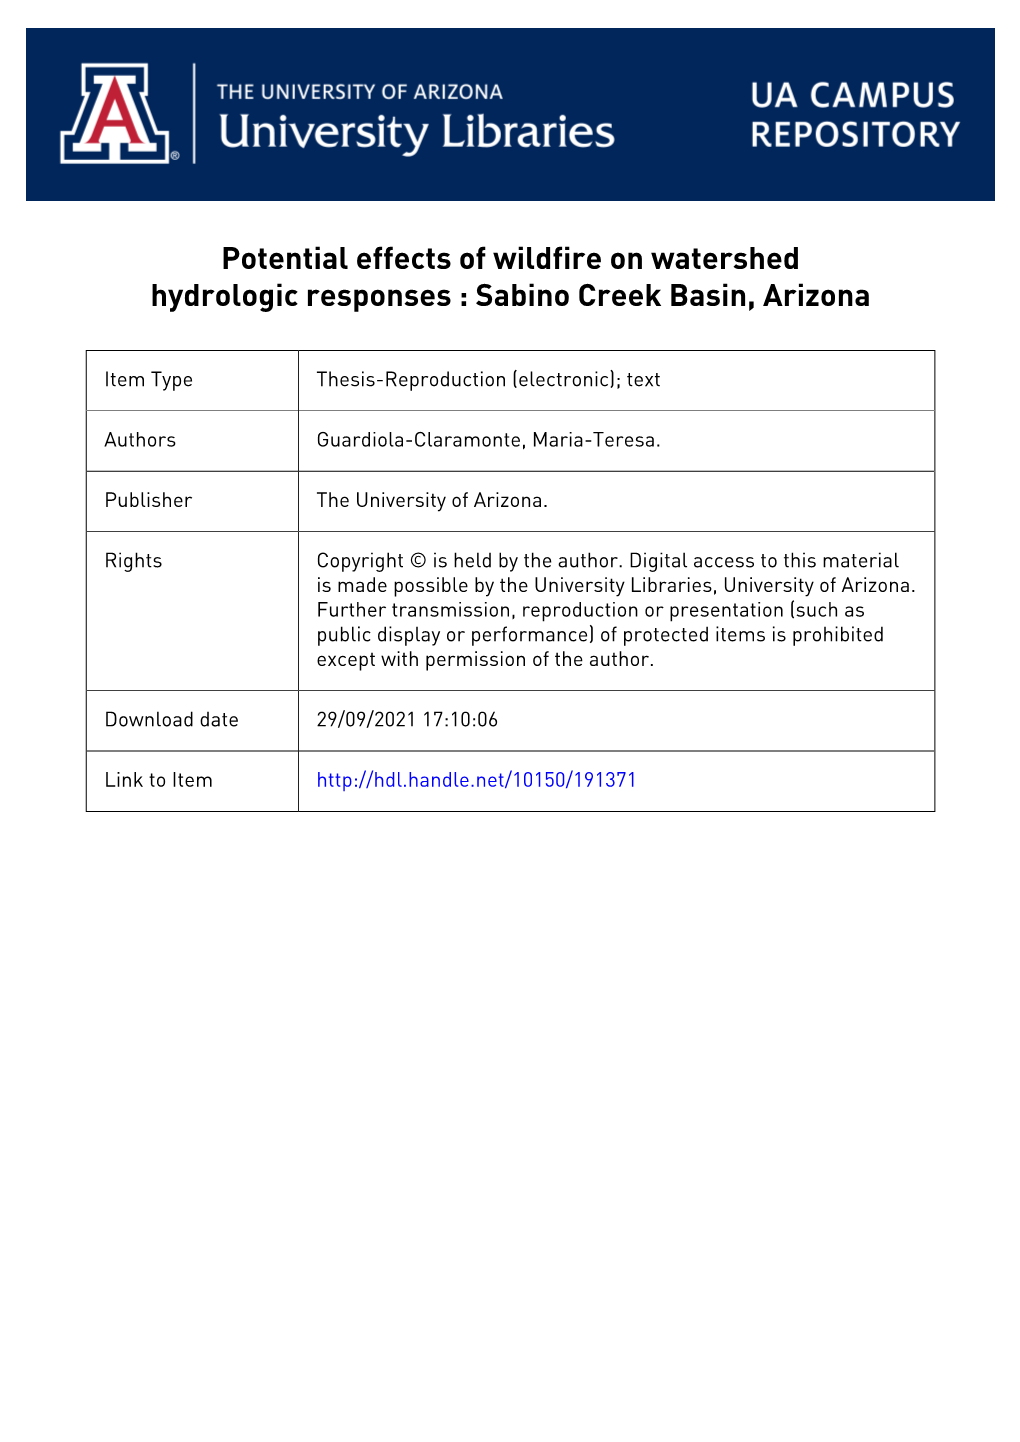 Potential Effects of Wildfire on Watershed Hydrologic Responses : Sabino Creek Basin, Arizona